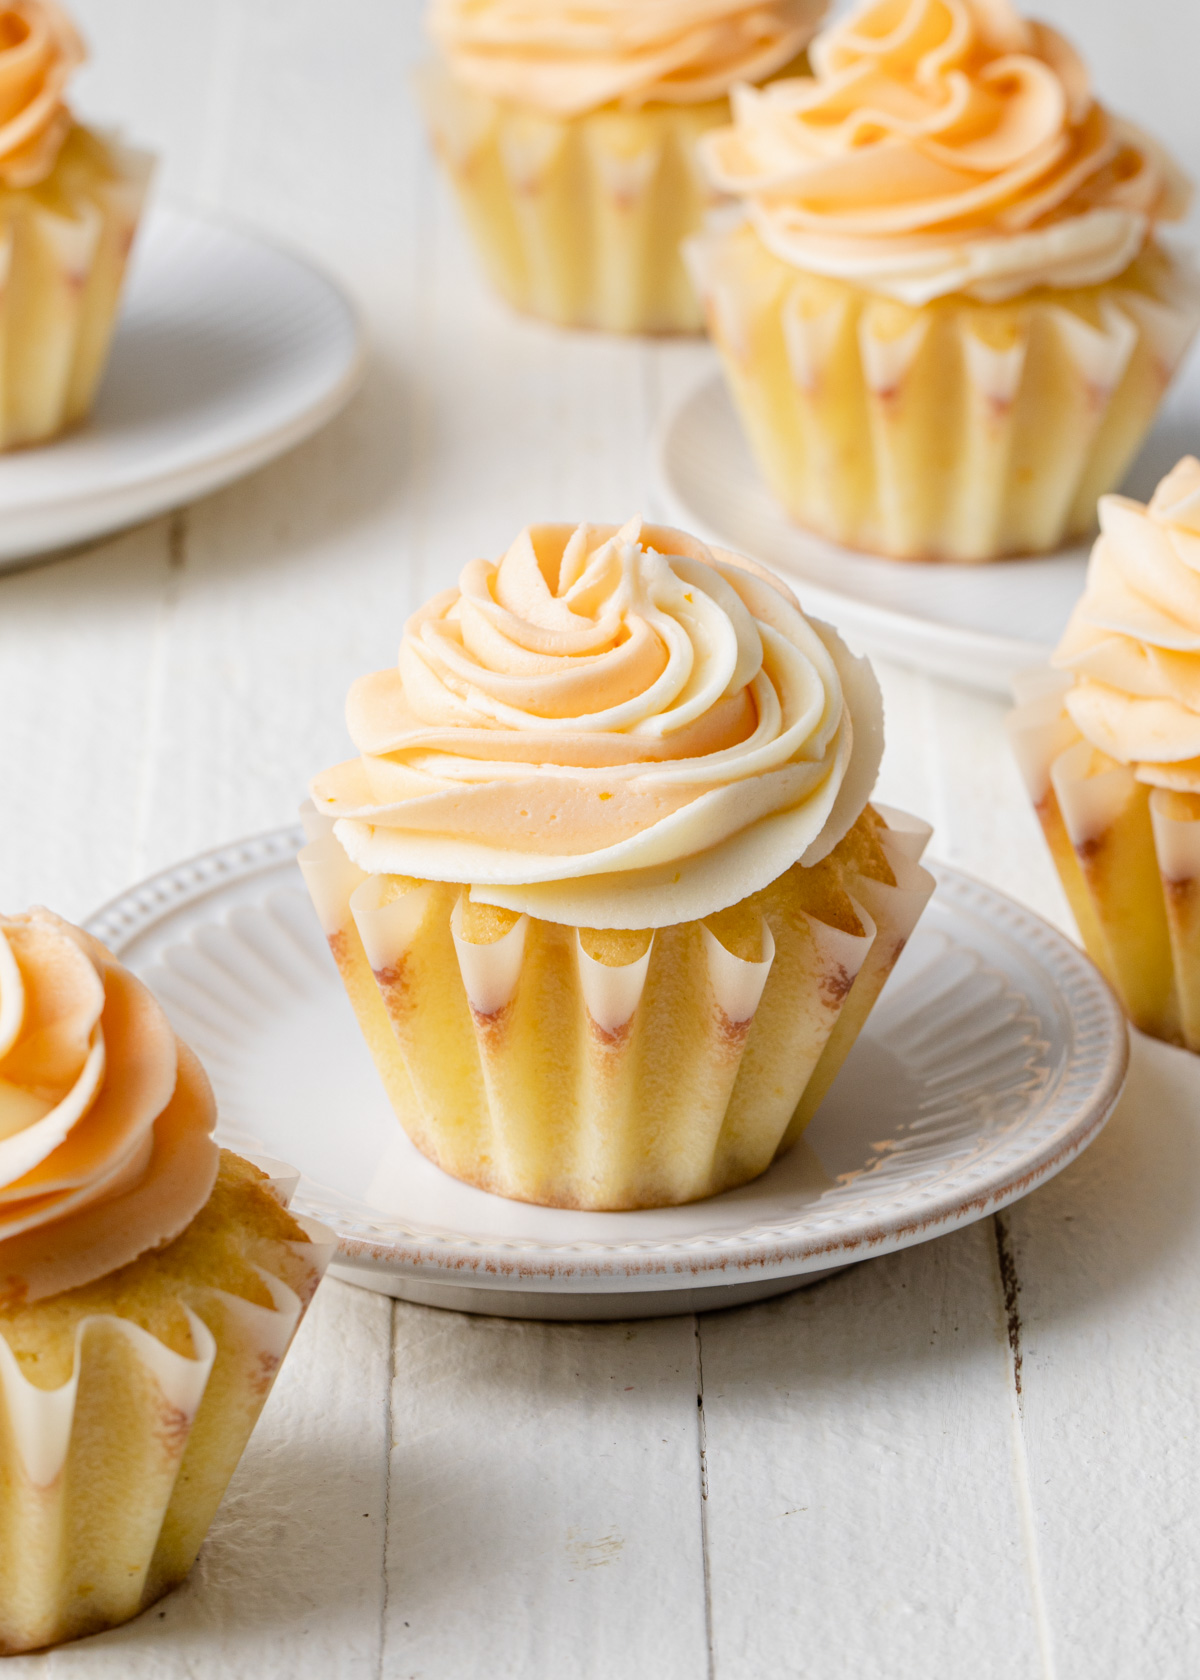 A close up of a cupcake with swirls of orange buttercream on top